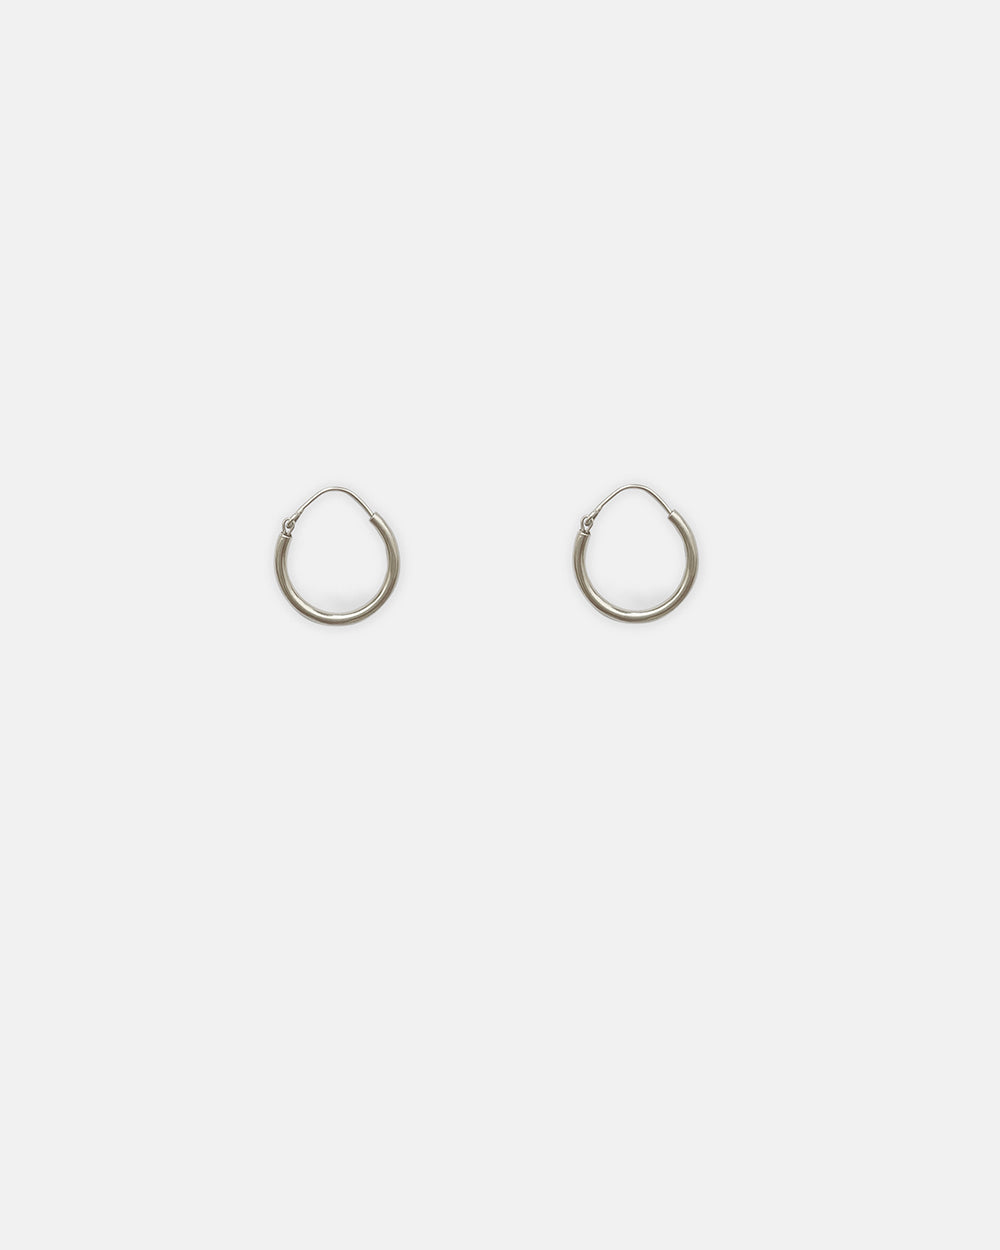 SMALL HOOPS IN SILVER